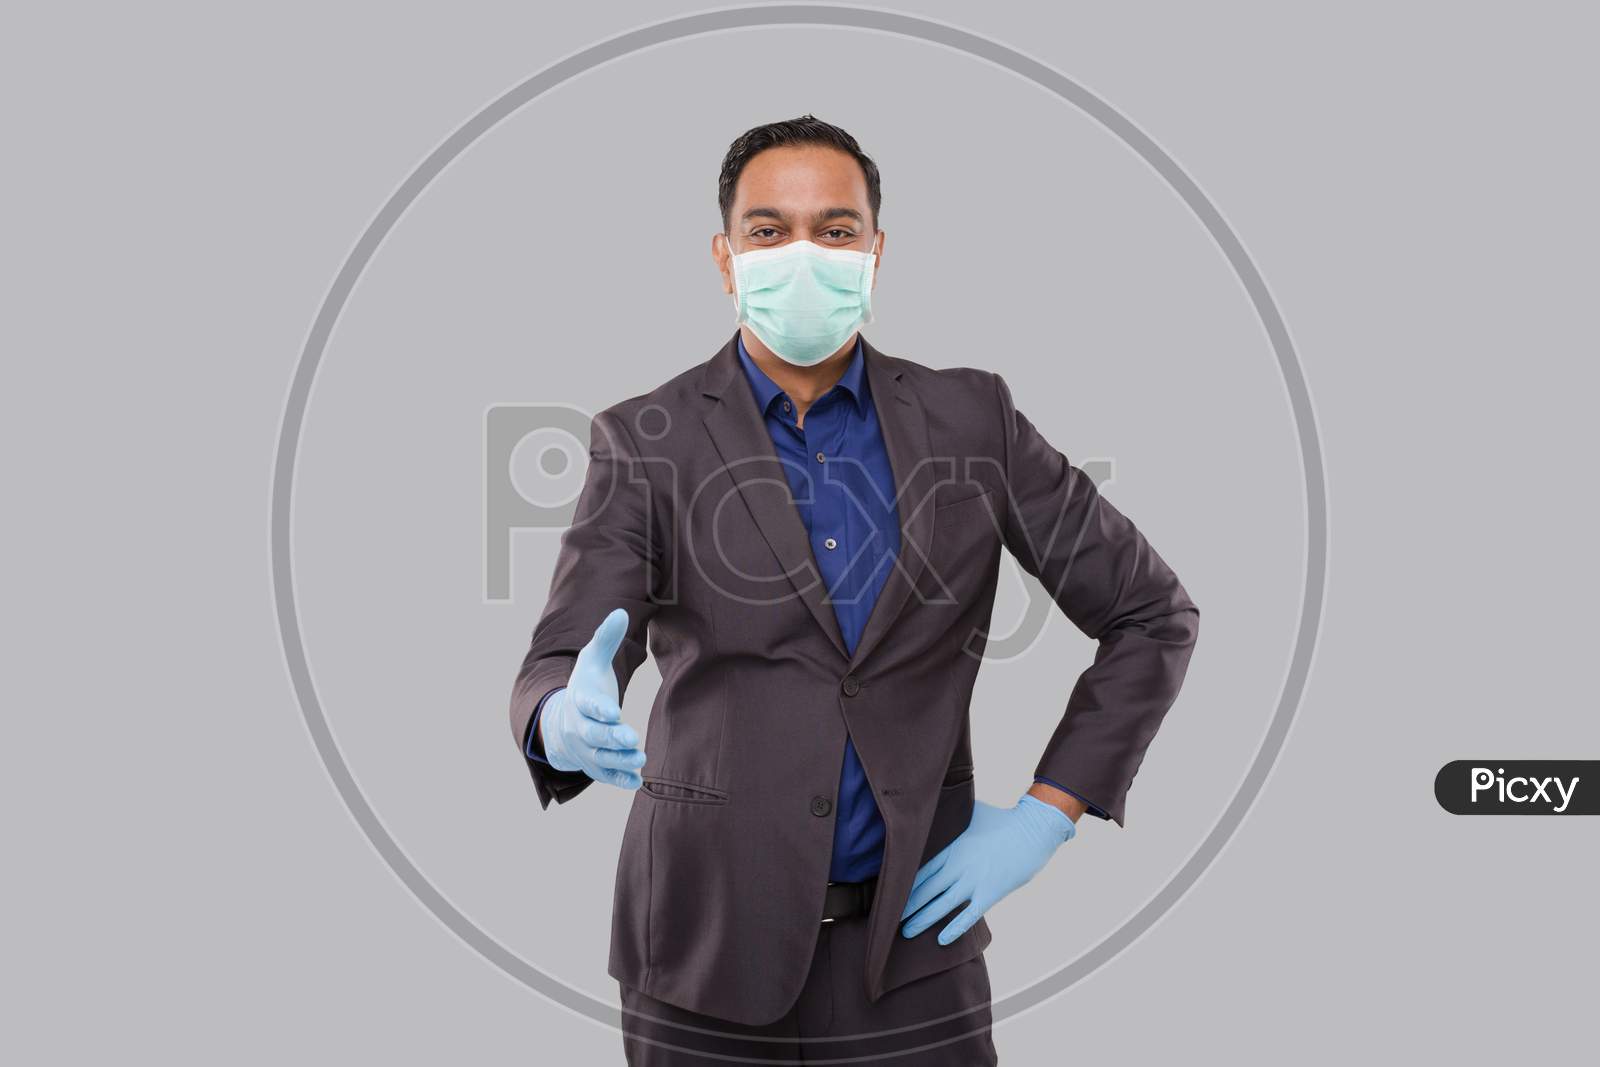 Indian Businessman Offering Hand To Shake Wearing Medical Mask And Gloves. Greeting And Welcoming Gesture. Business Advertisement Concept. Businessman Hand Shake